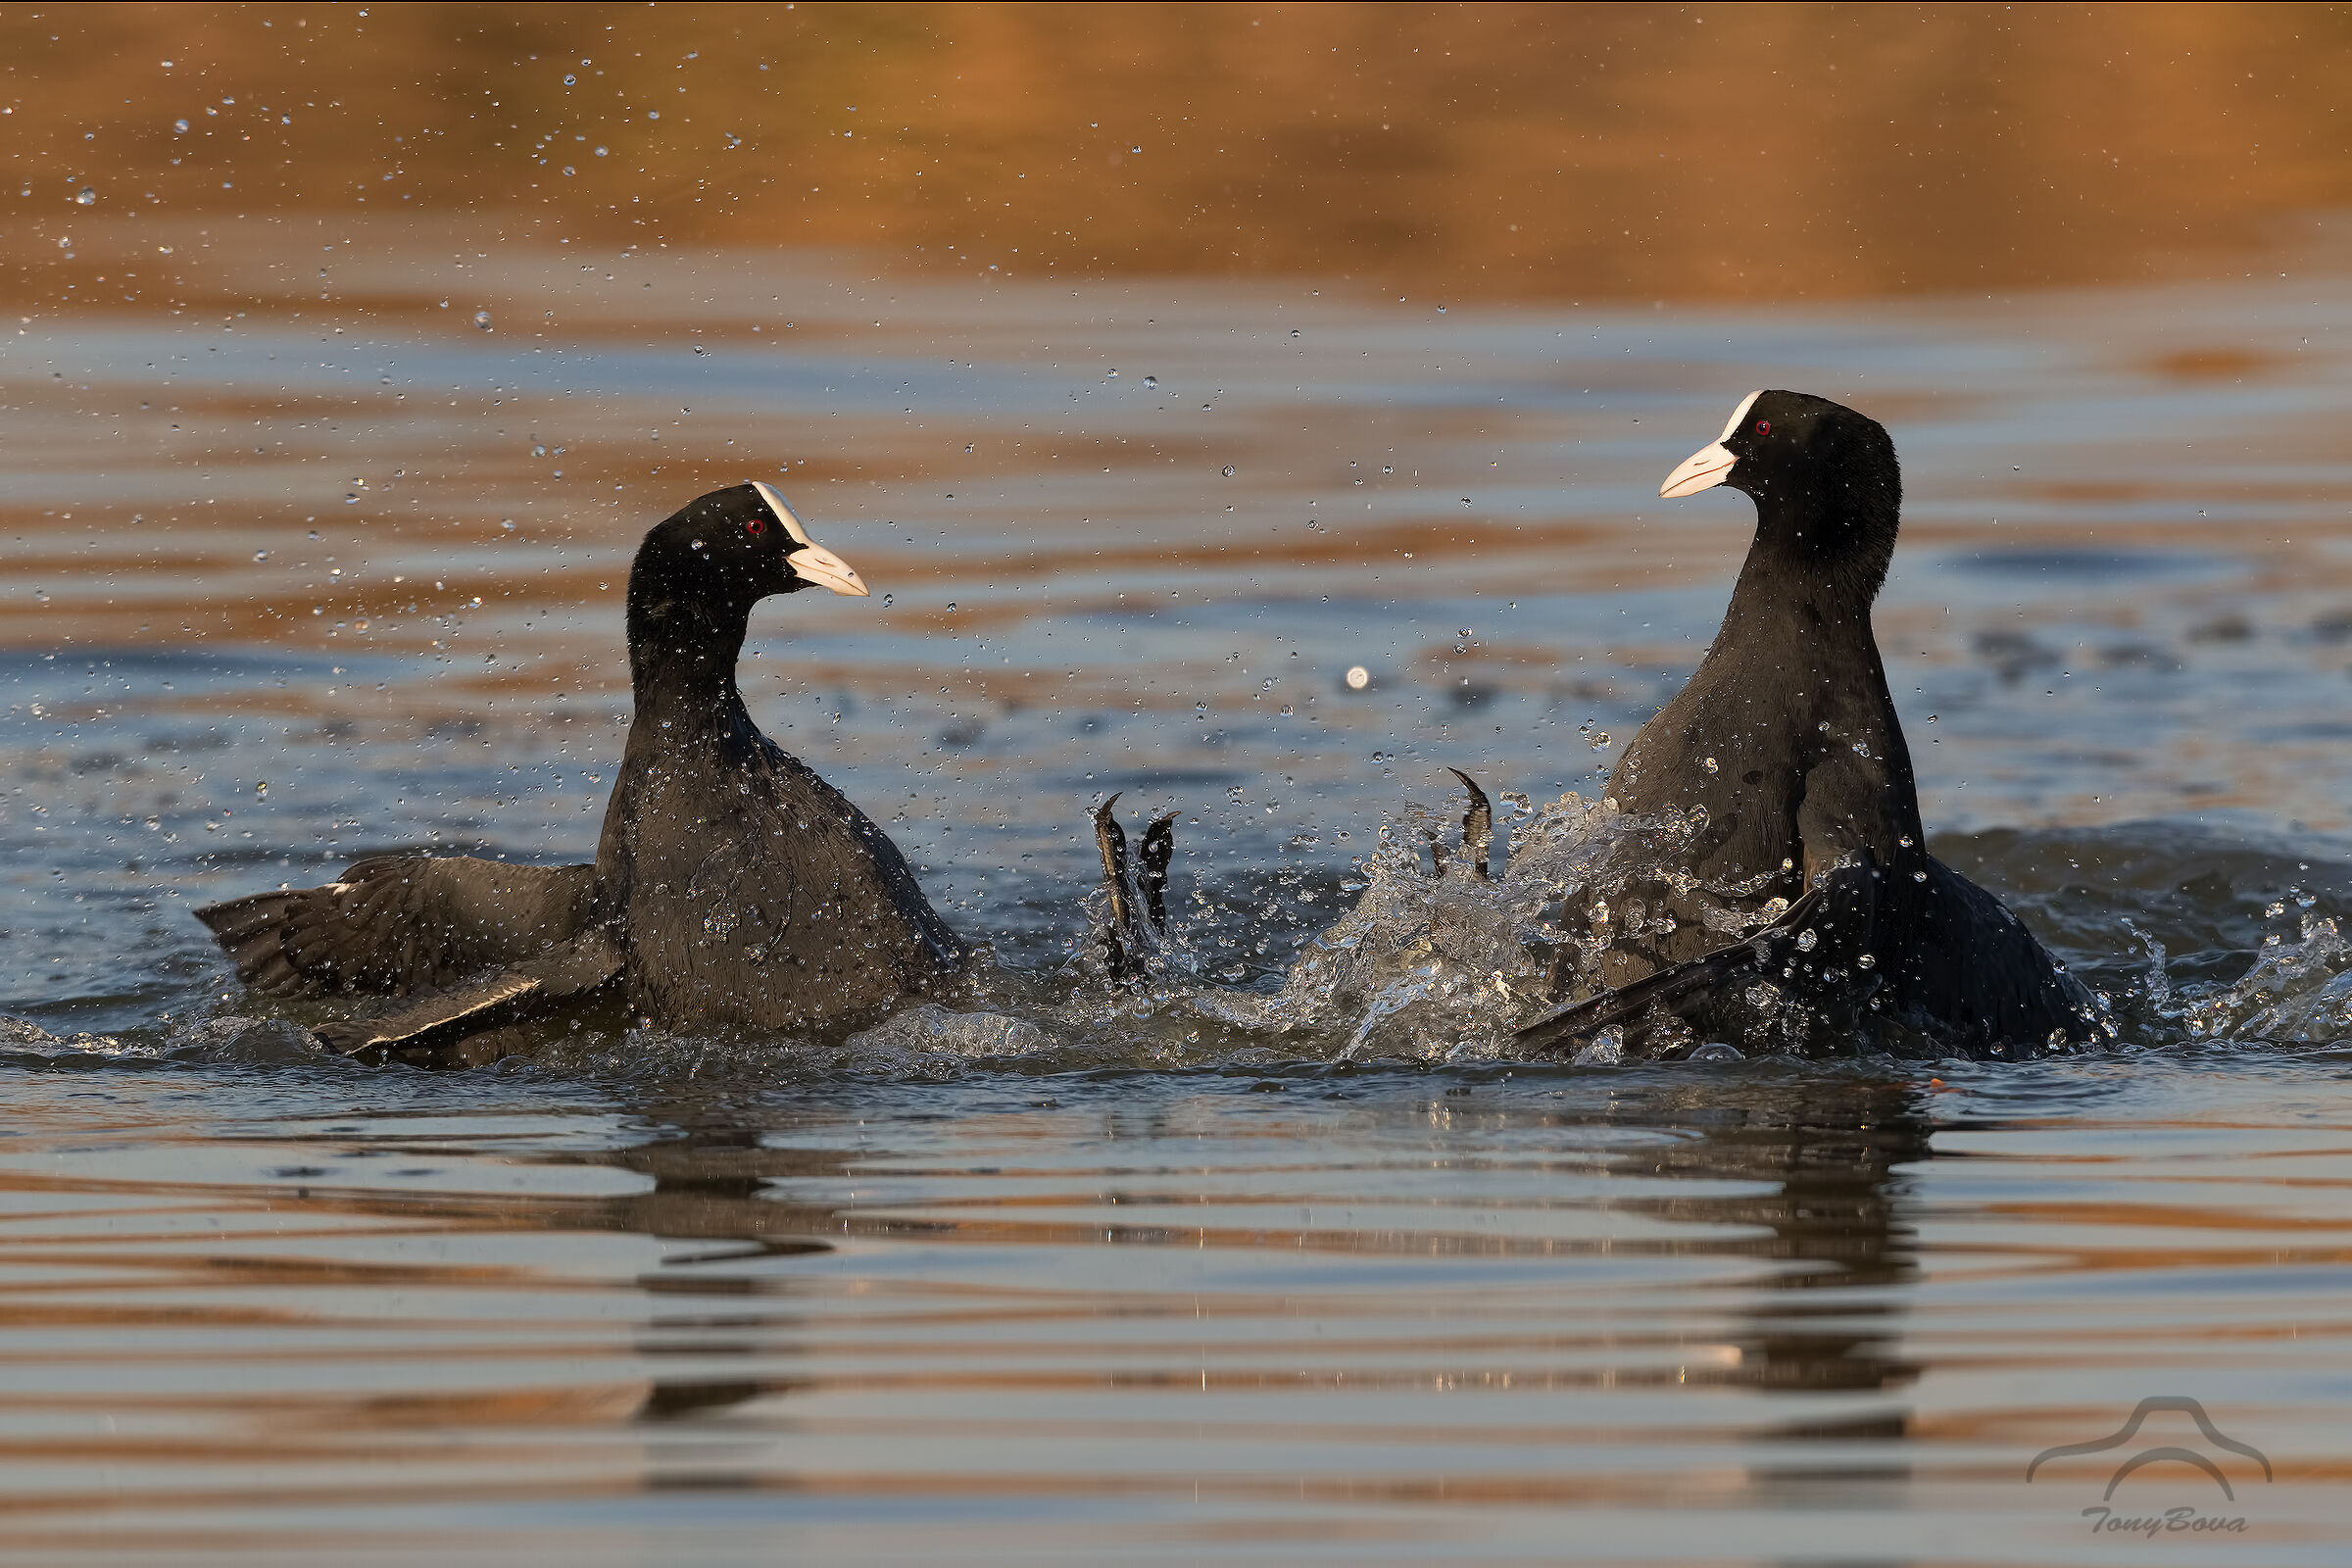 Coots in action ......